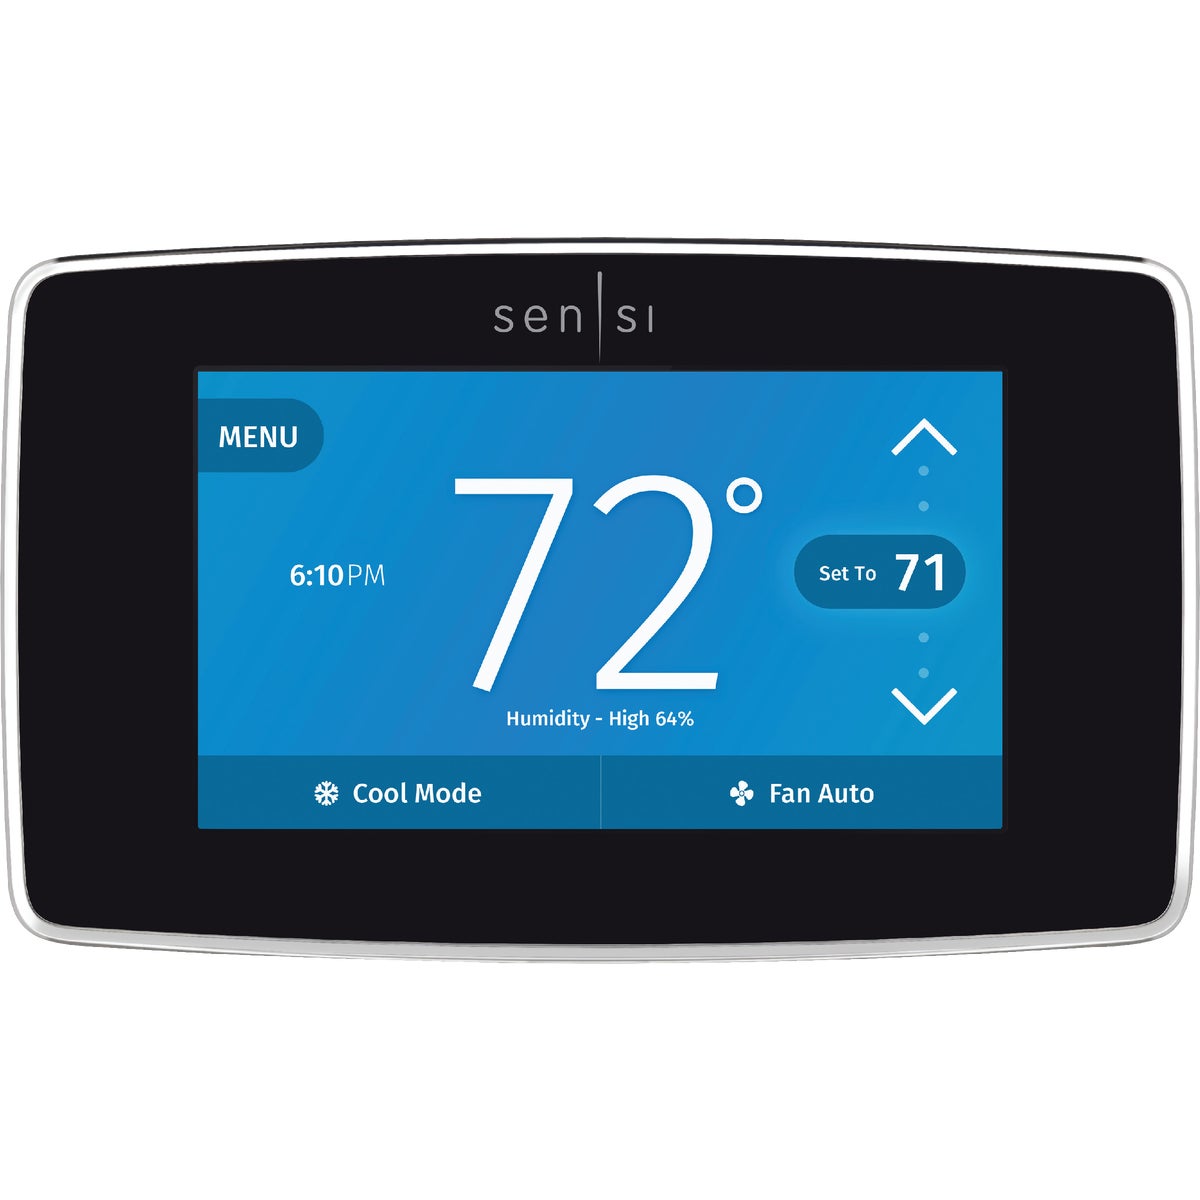 Item 404507, The Sensi Touch WiFi thermostat puts comfort control anytime, anywhere, at 